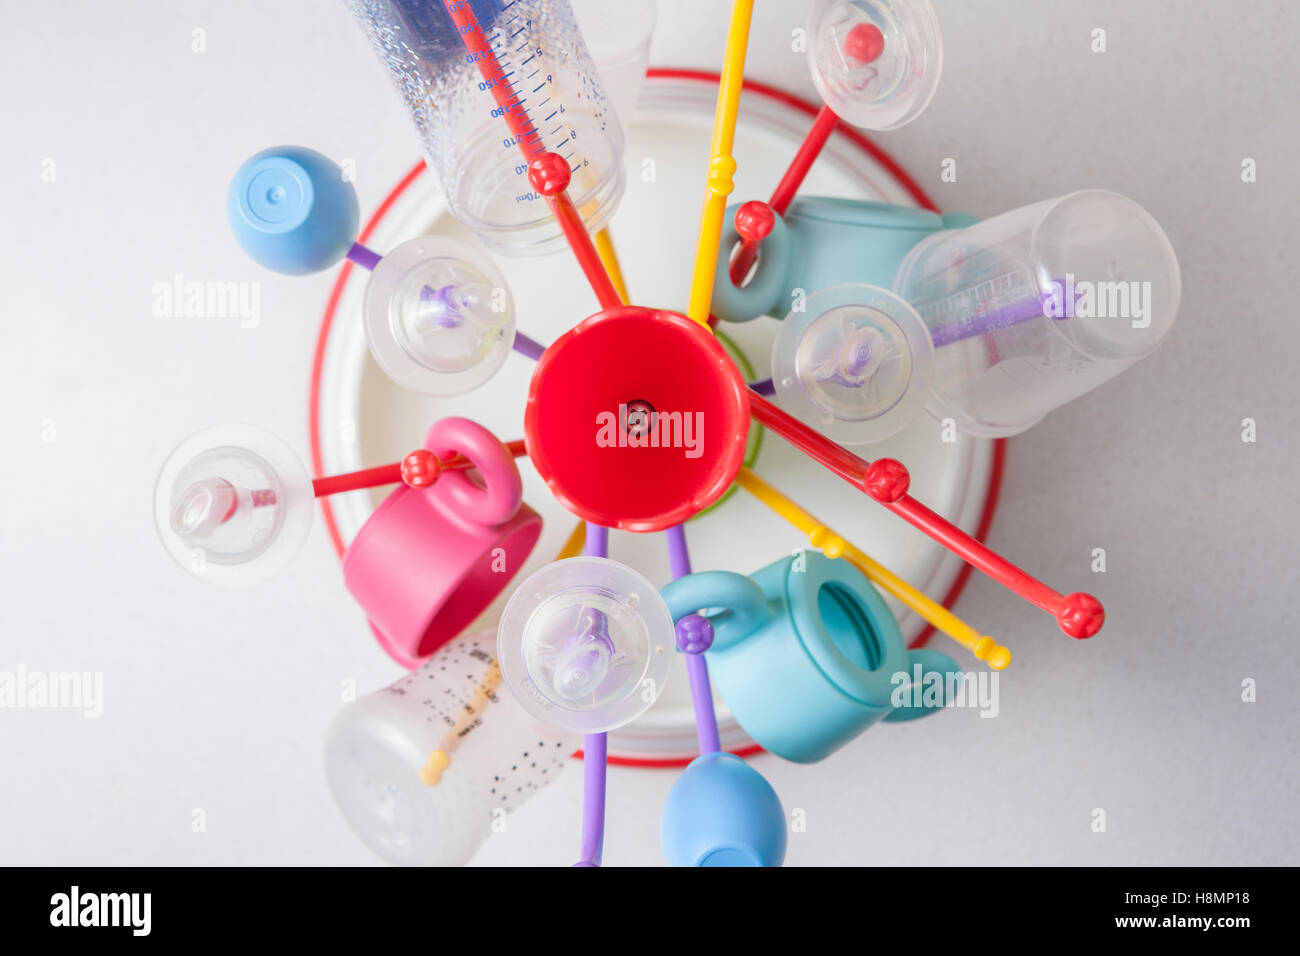 Baby drainer full of plastic tableware objects as baby bottles. High view angle Stock Photo